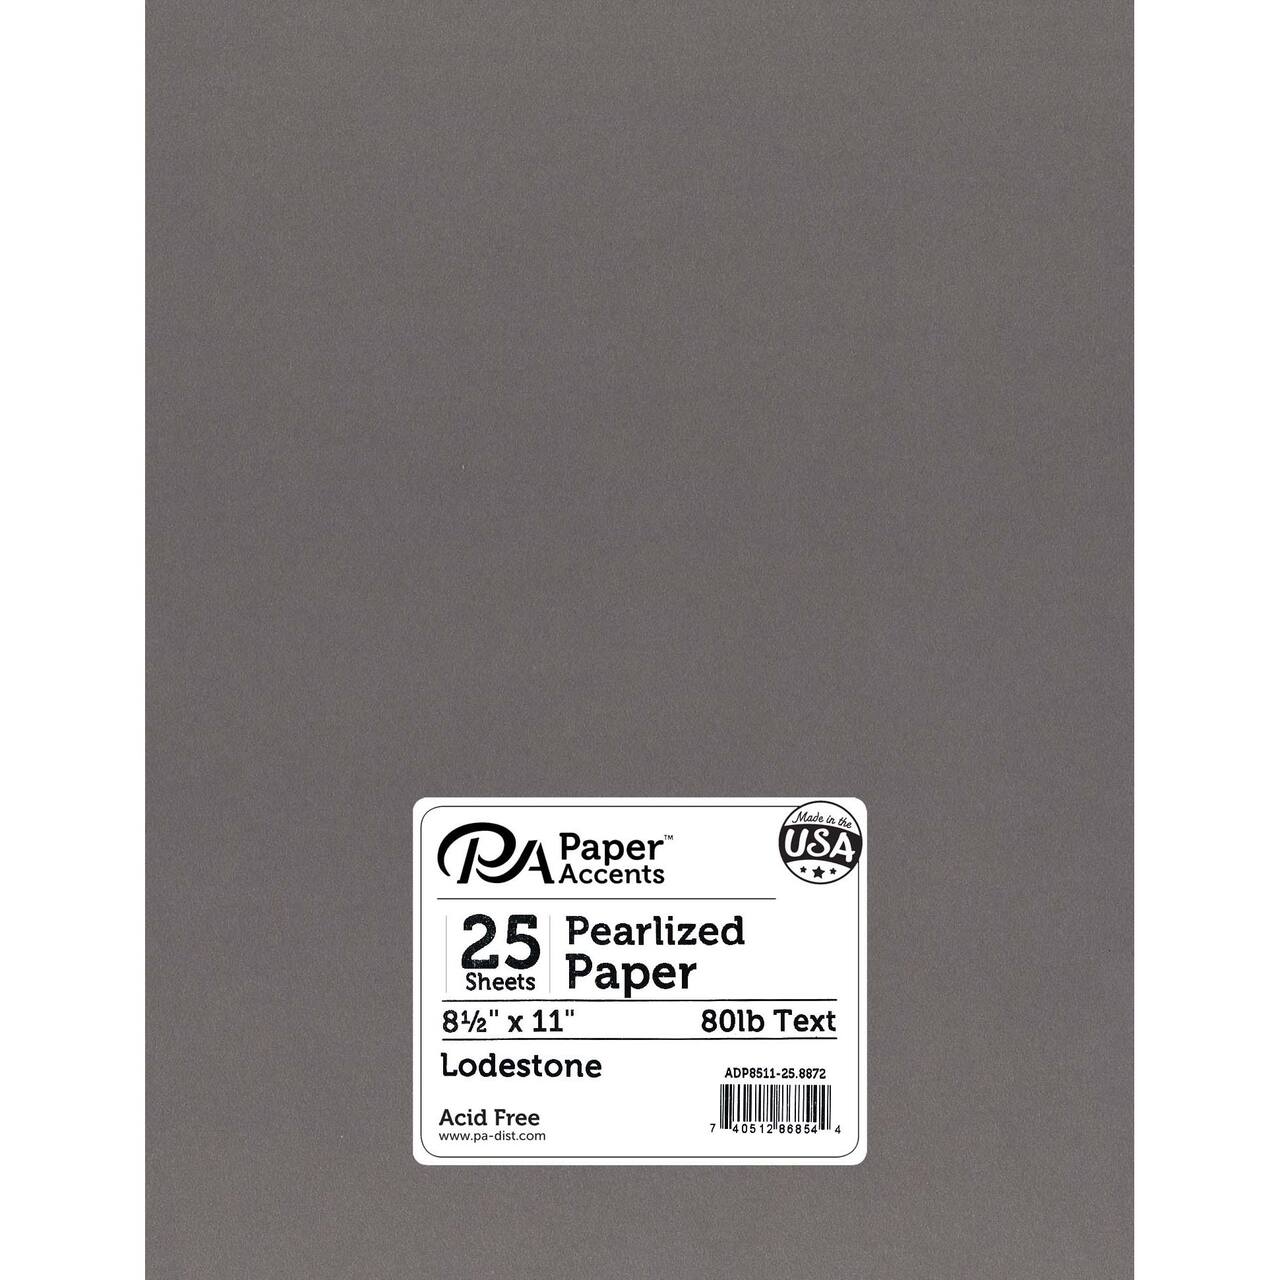 PA Paper&#x2122; Accents Pearlized 8.5&#x22; x 11&#x22; 80lb. Paper, 25 Sheets